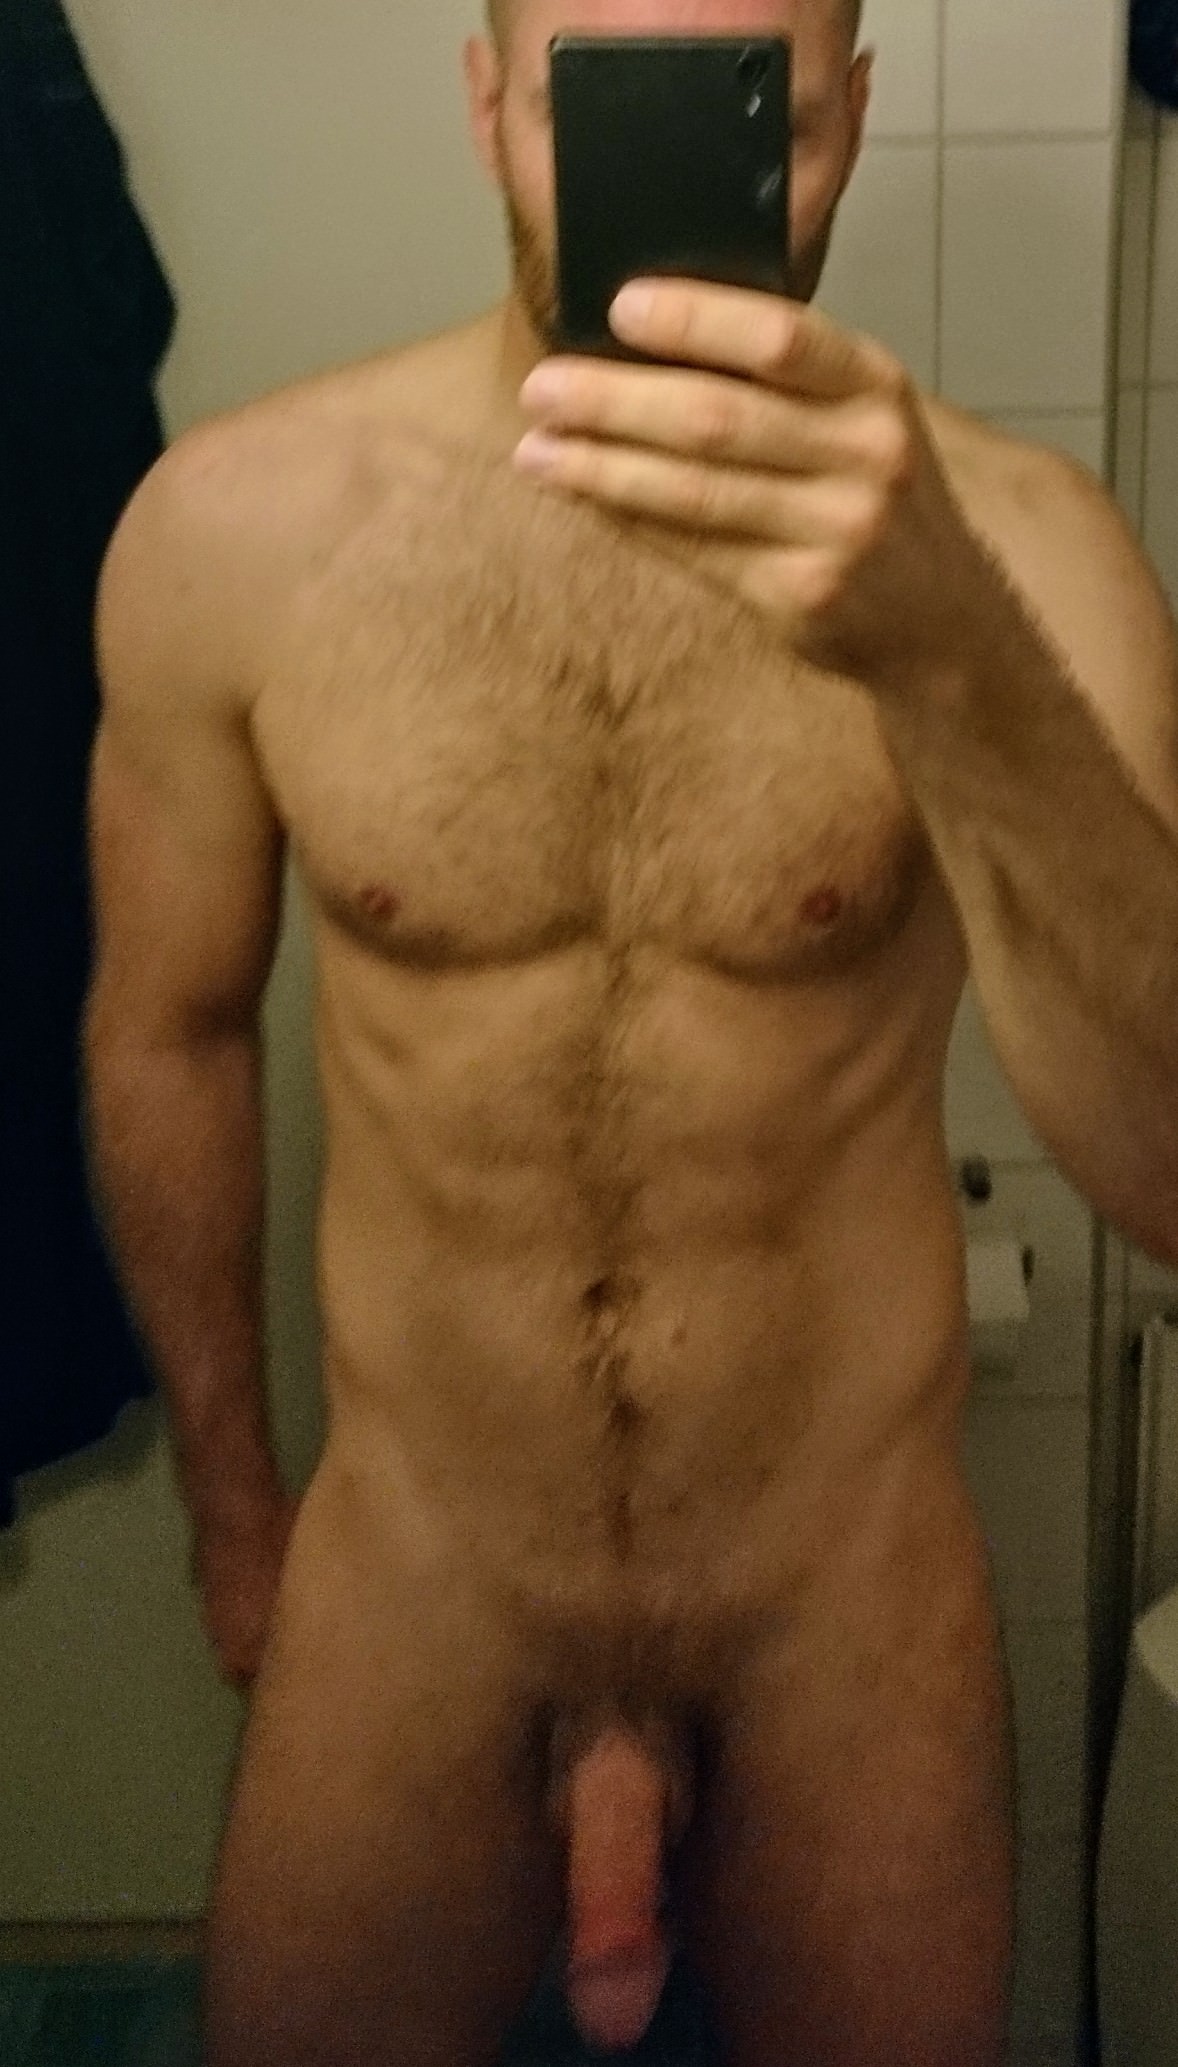 [40] Another day, another dad gone wild | Daddy/Mature  Porno | Hot XXX Gays